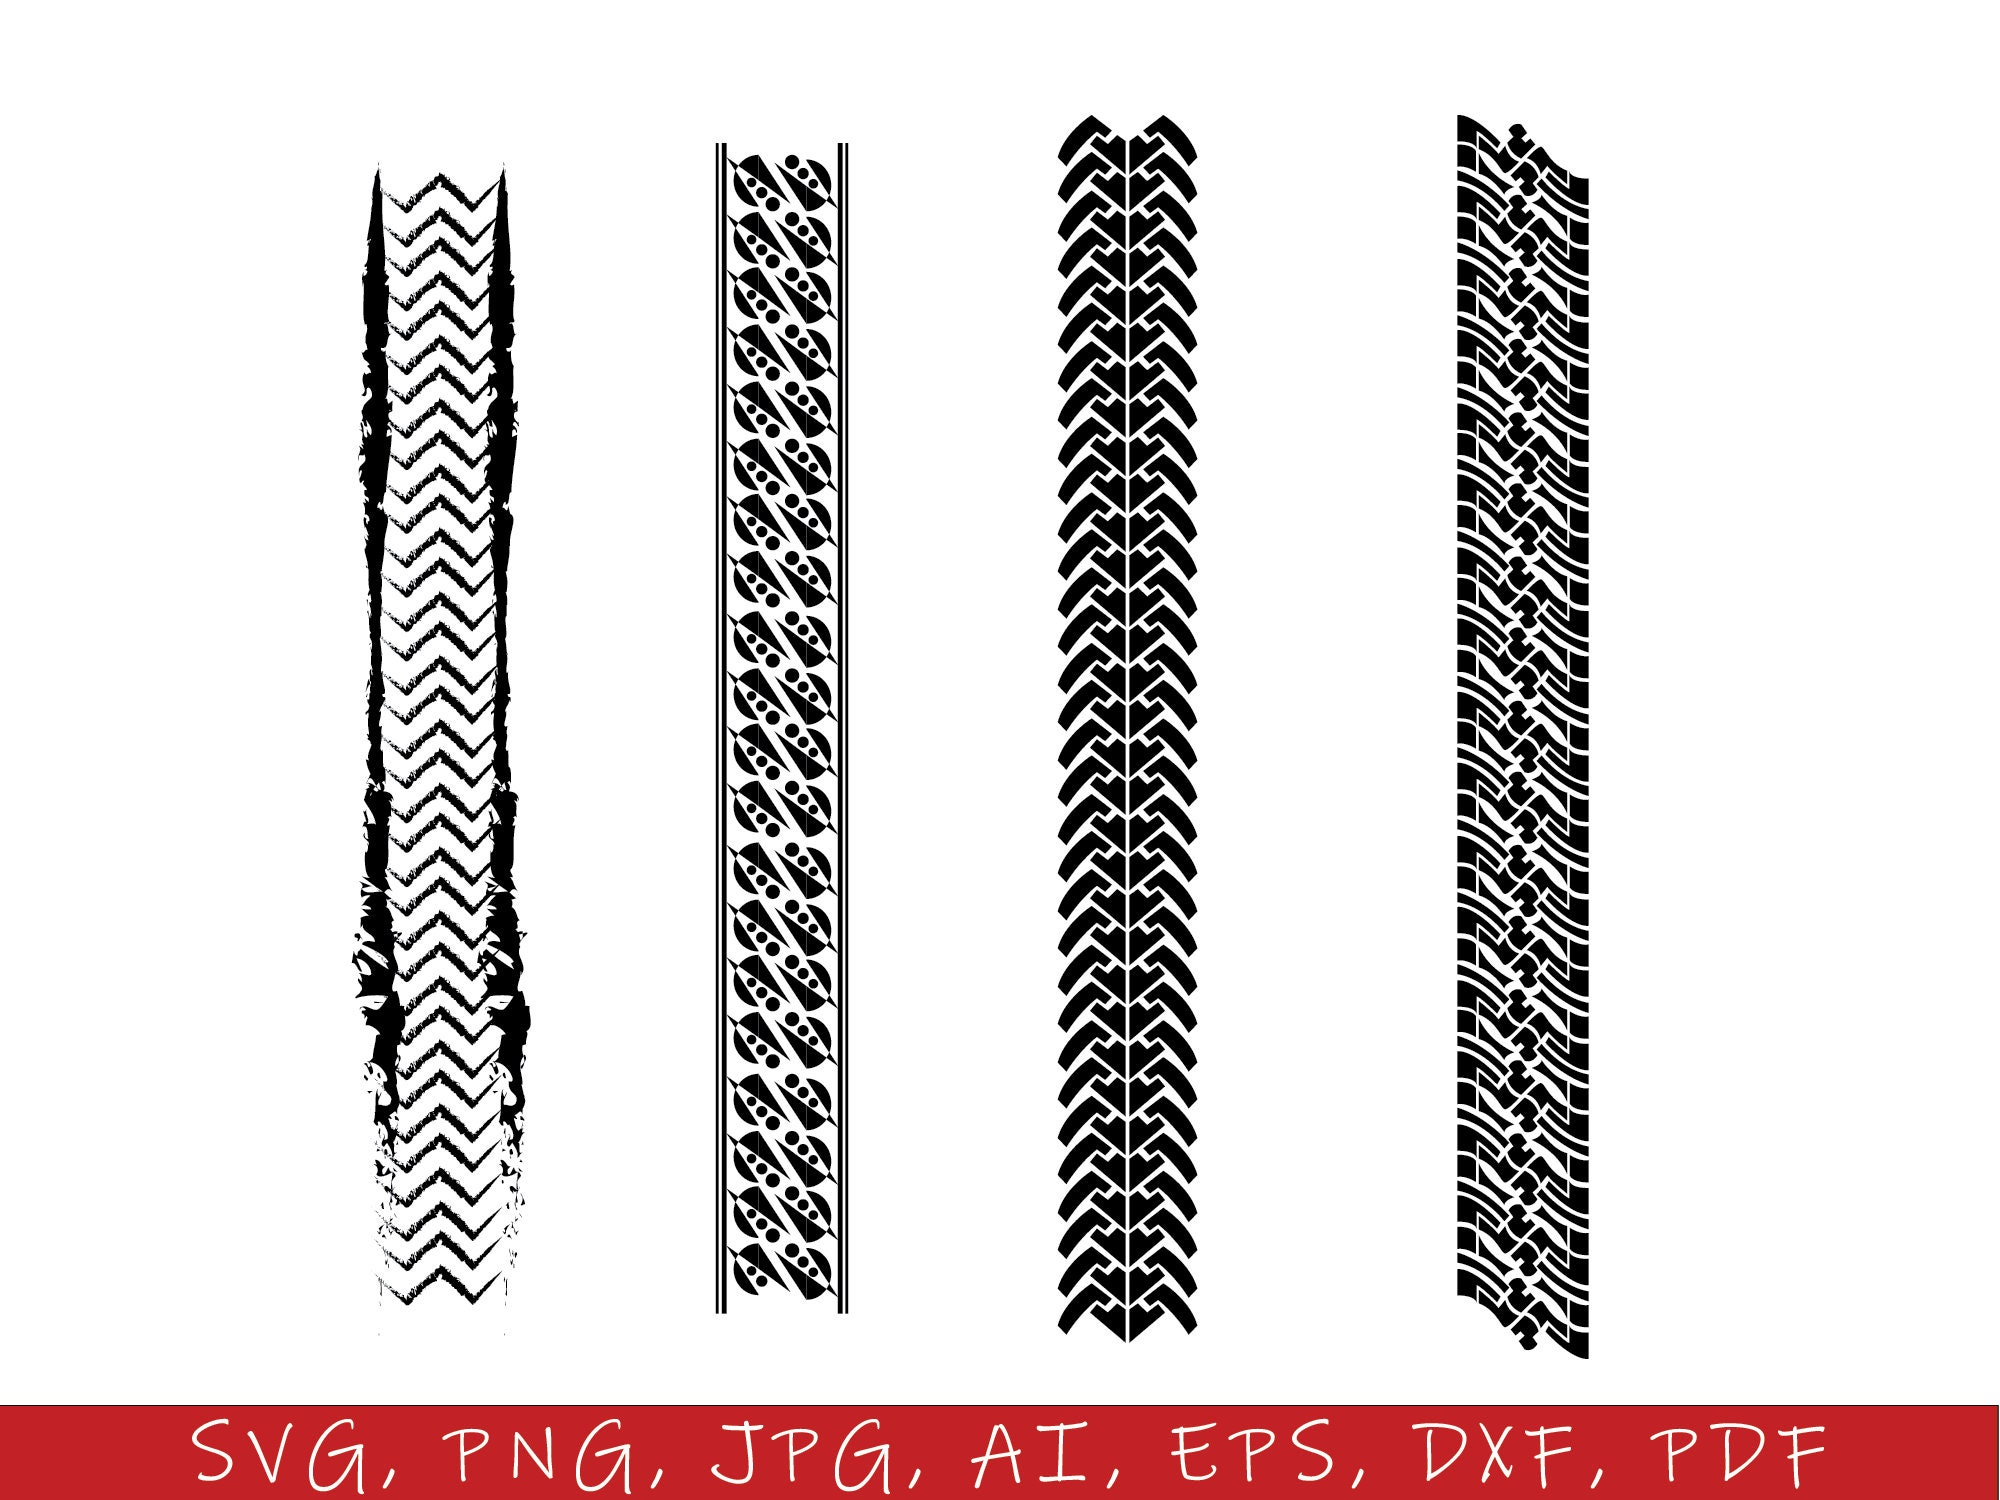 Racing Tire Tracks Sublimation Patches PNG, Distressed Tire Tracks Patches,  Sublimation PNG Patches, Tire Tracks, Dirt Track Racing